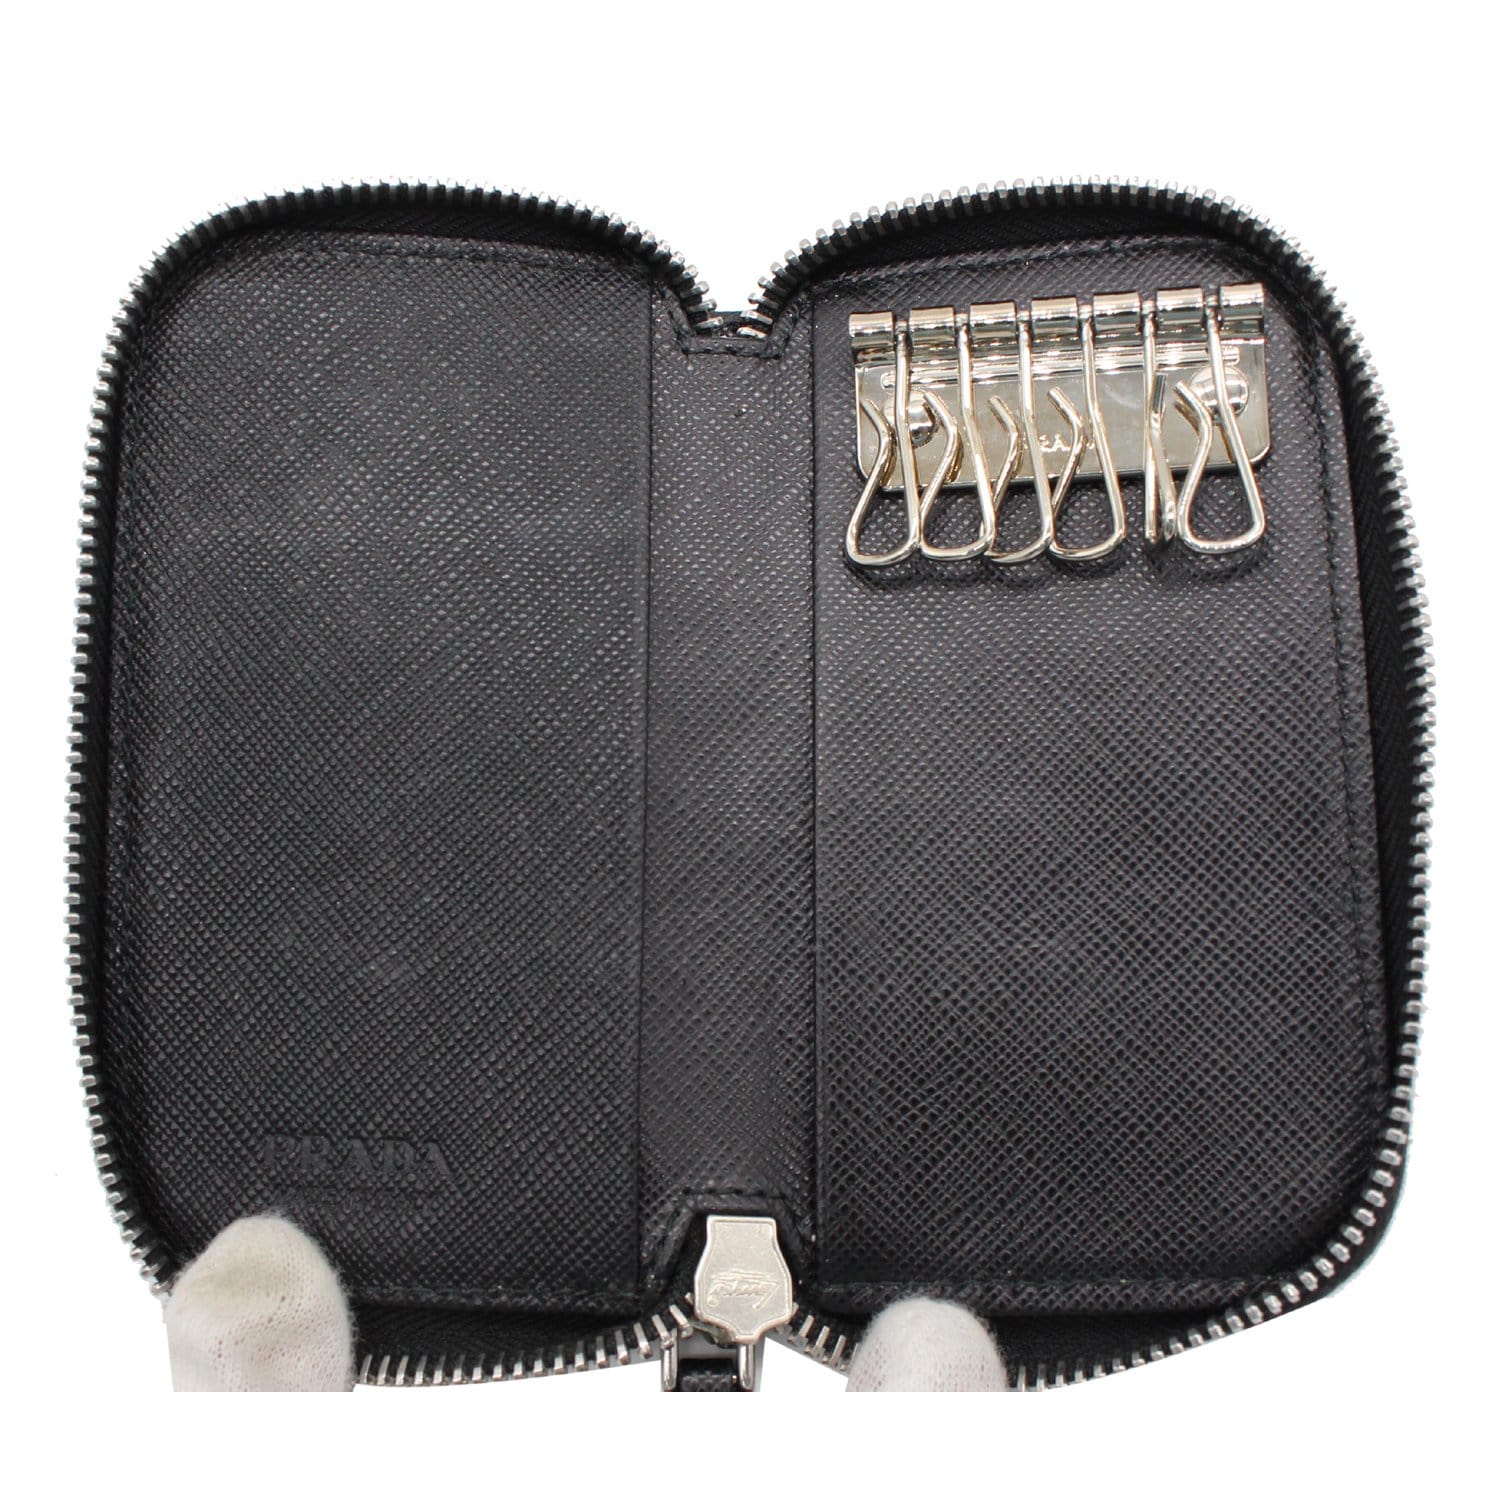 Buy Free Shipping [Genuine guarantee] [New article] Prada PRADA 4  consecutive key case Saffiano leather genuine leather black gold metal  fittings 1PG004 men's women's key holder from Japan - Buy authentic Plus